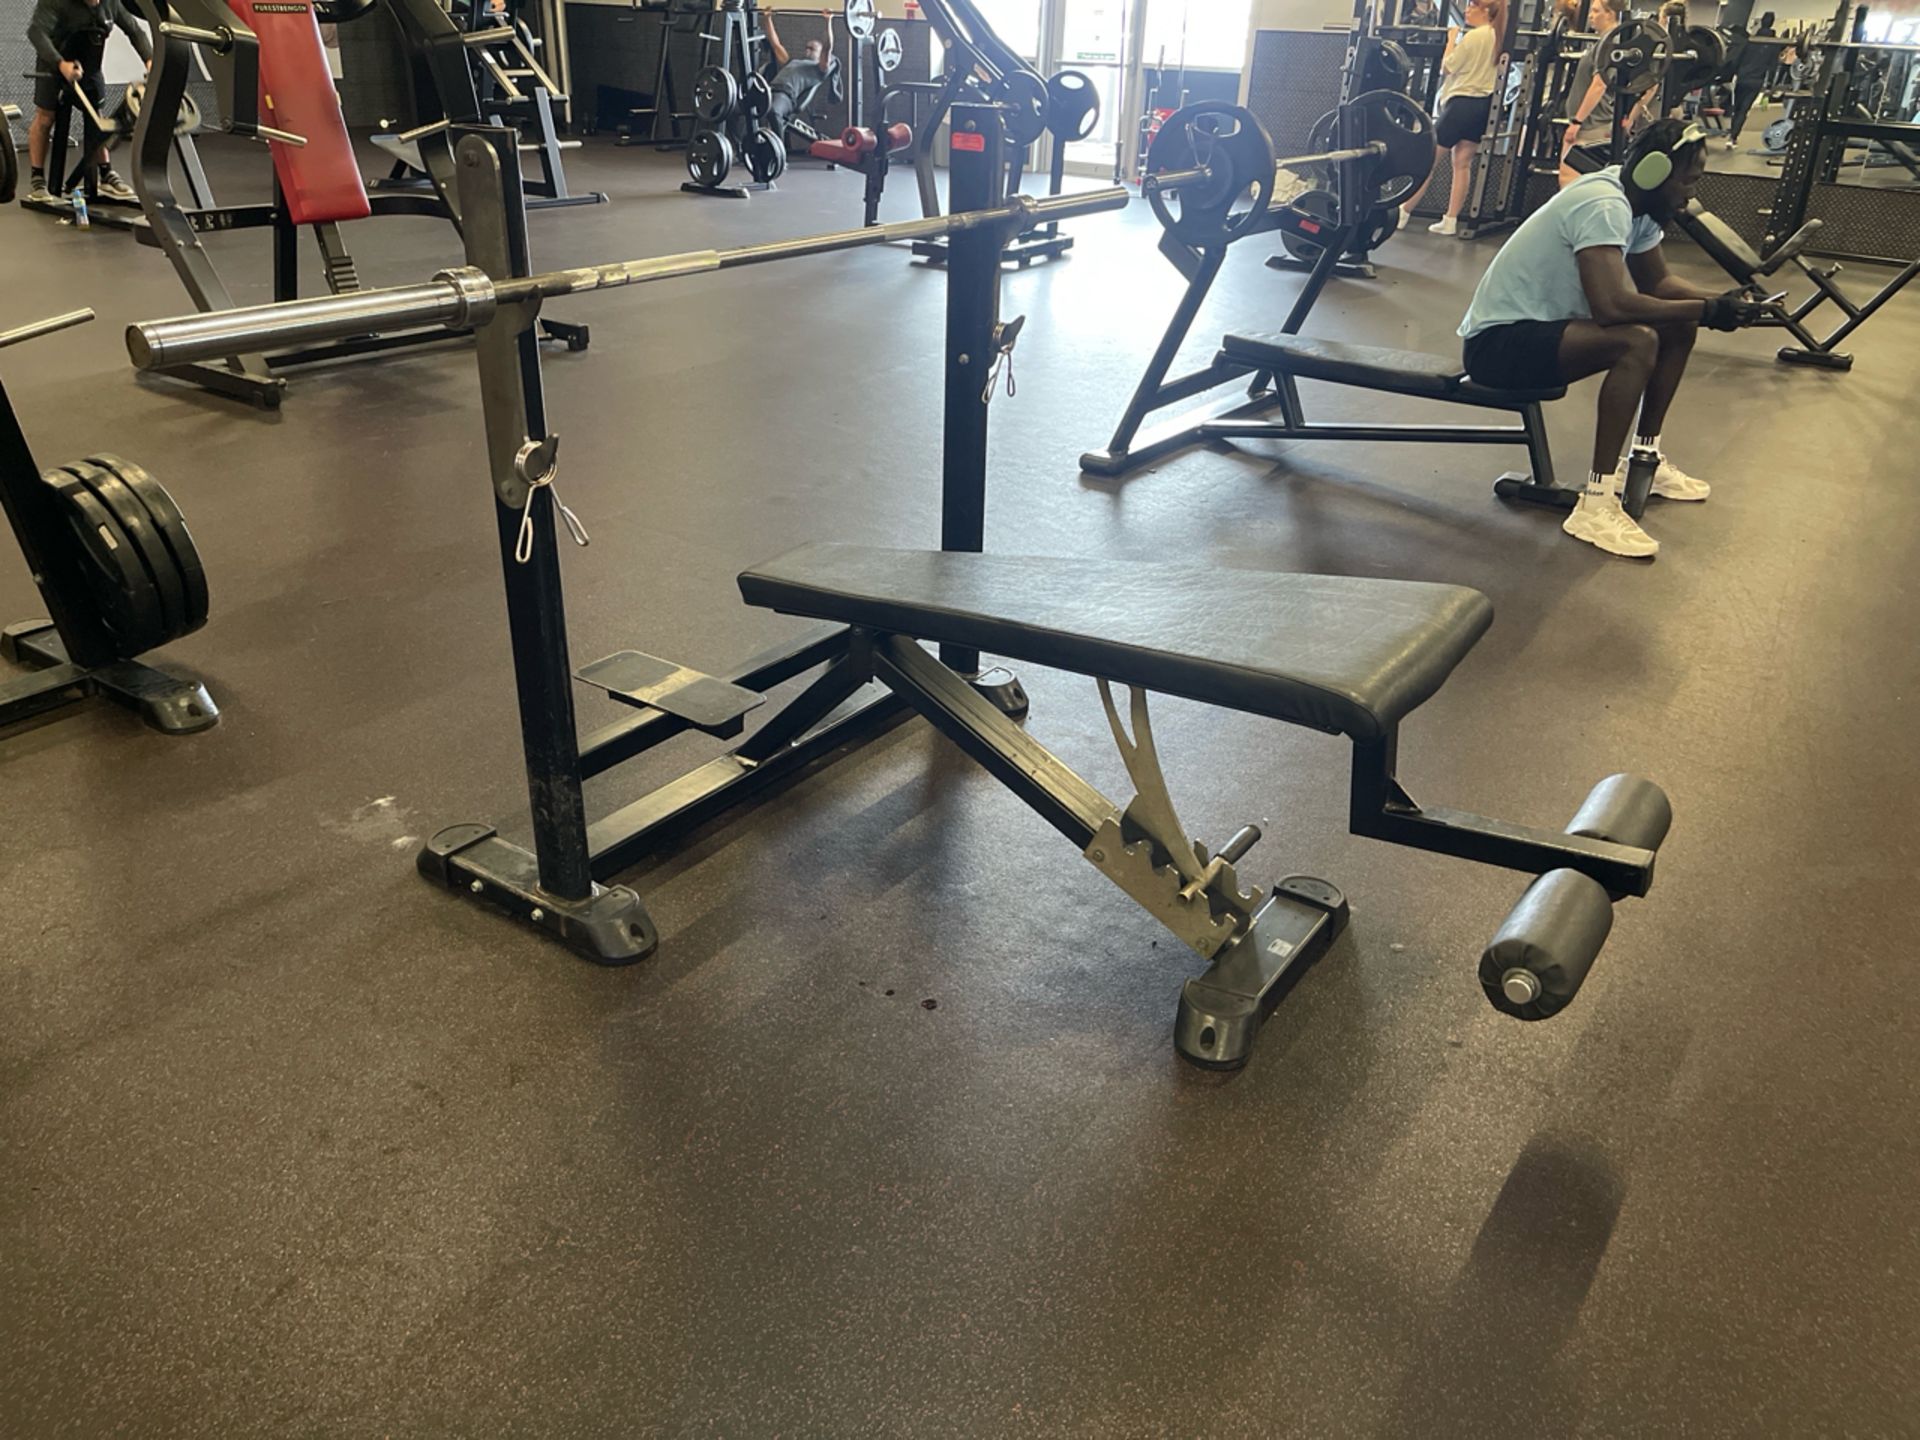 Force Adjustable Decline Olympic Bench